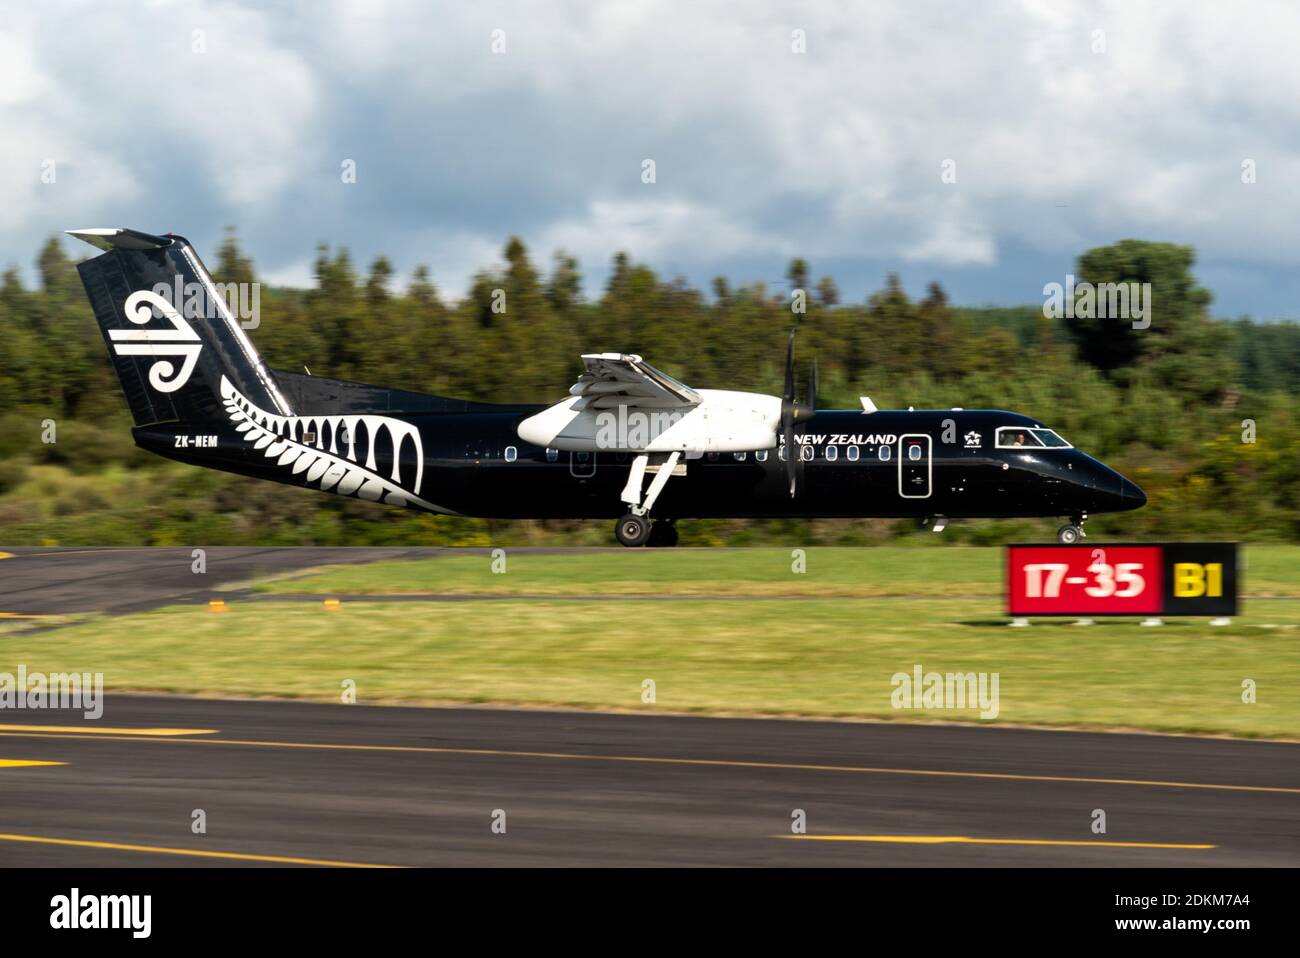 An Air New Zealand Bombardier Dash 8 Q300 series painted in all black colors accelerates for takeoff from Taupo Airport Stock Photo